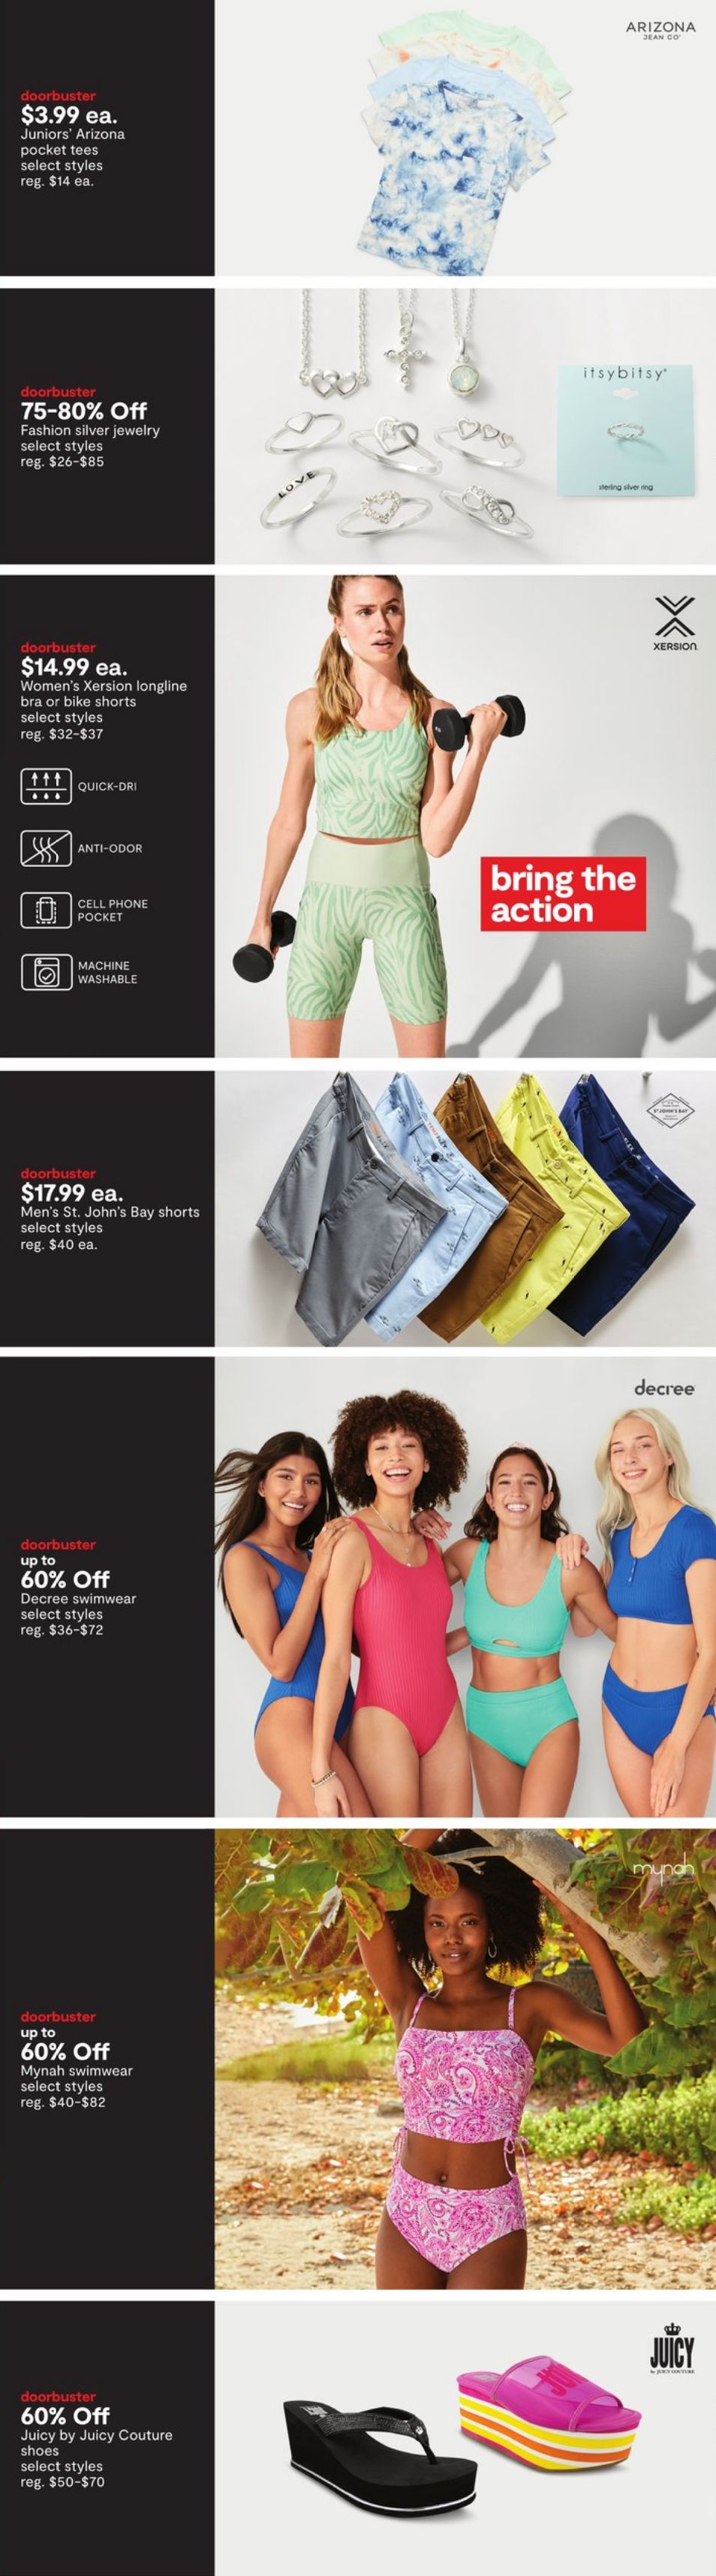 Weekly ad JC Penney 05/13/2022 - 05/15/2022